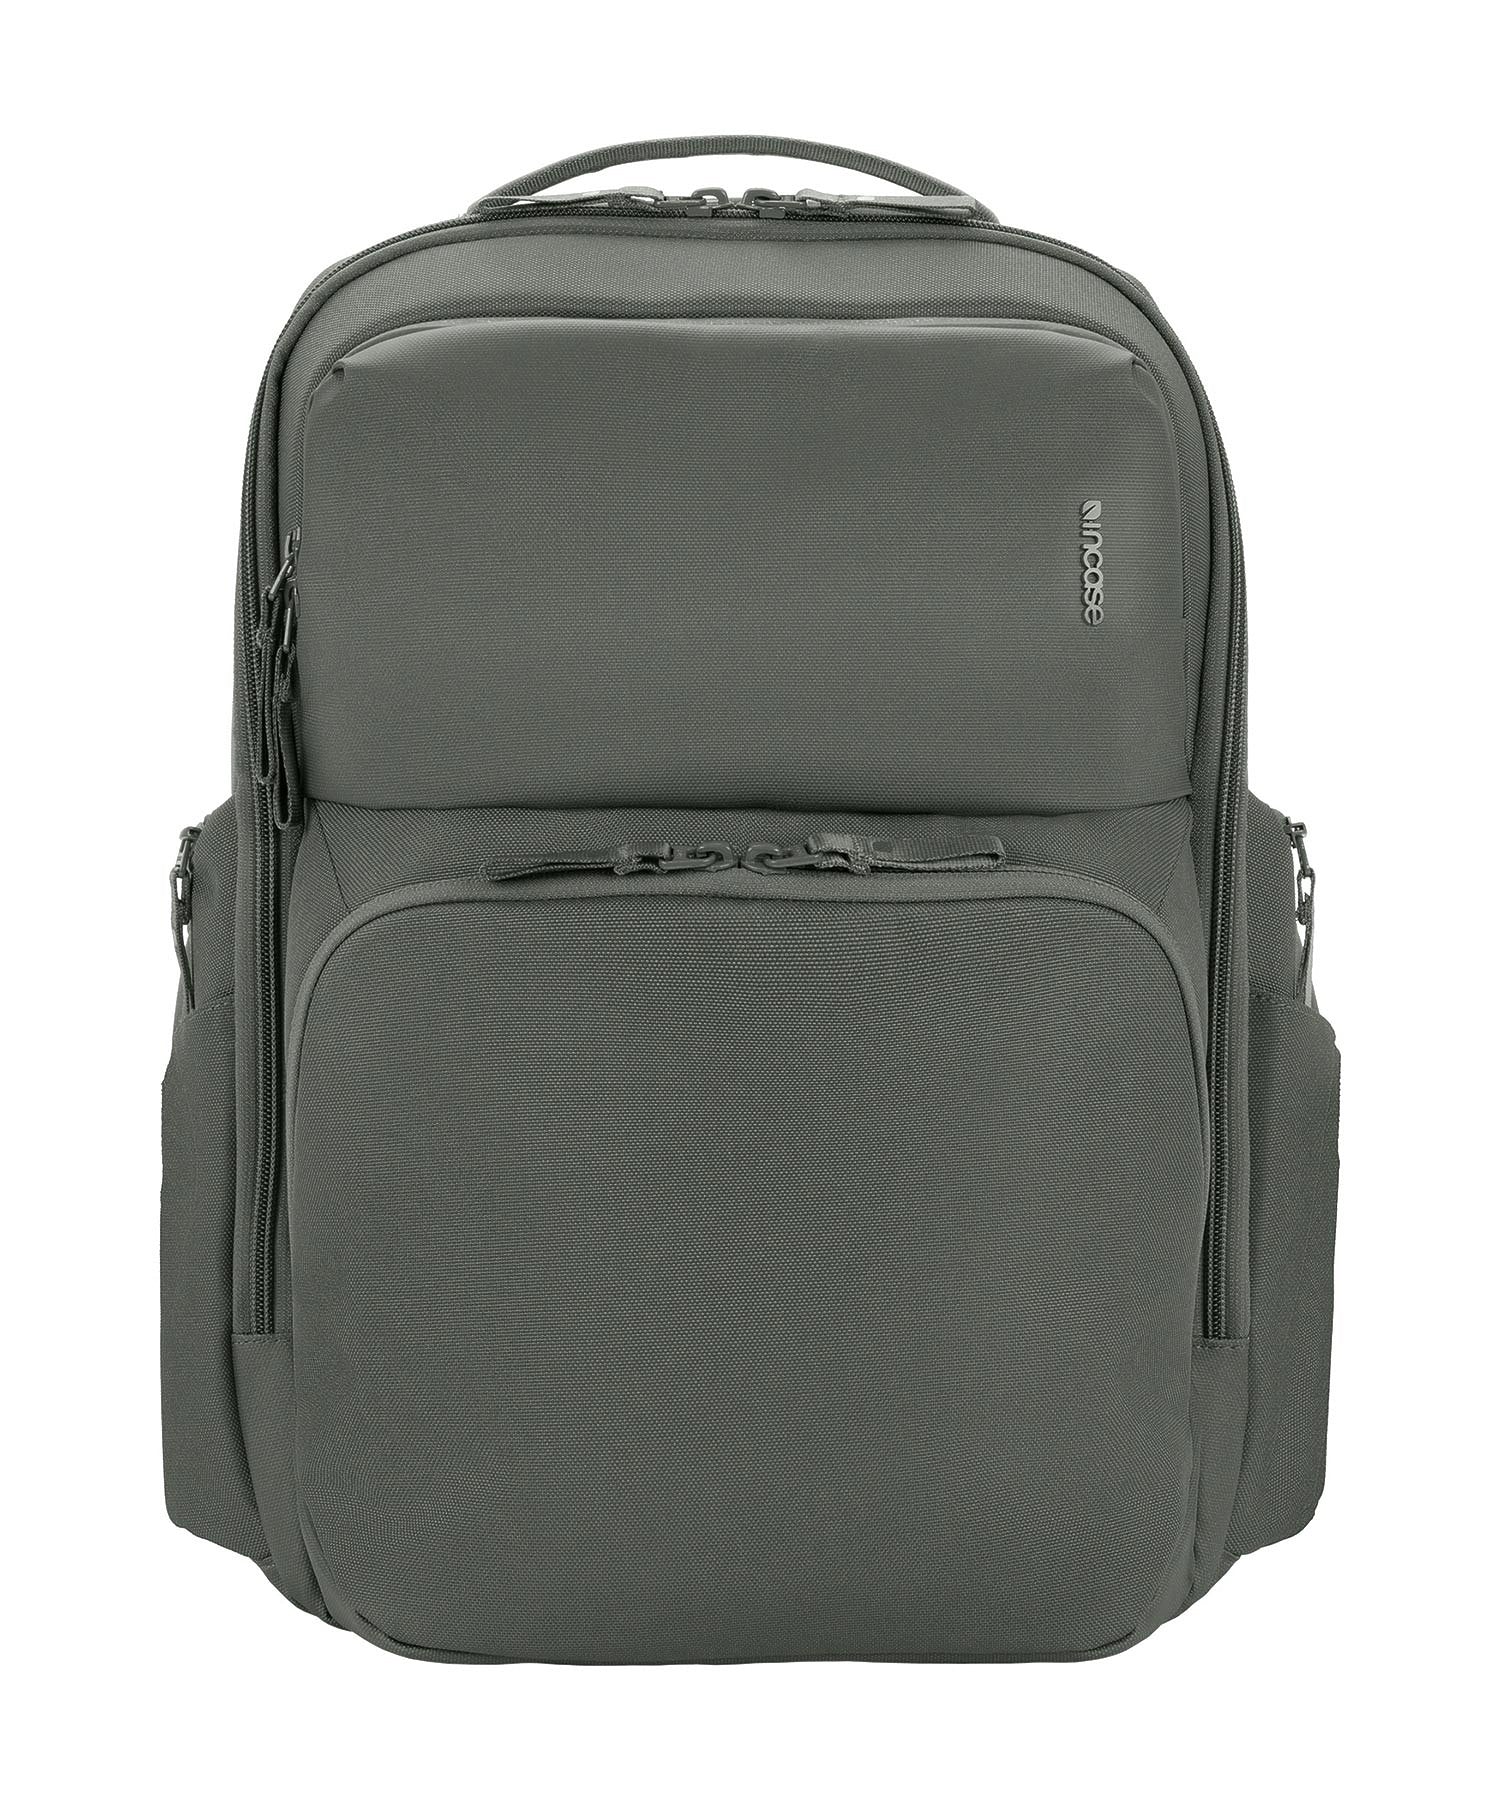 INCO100683-SIV Incase A R C Commuter Pack - Smoked Ivy